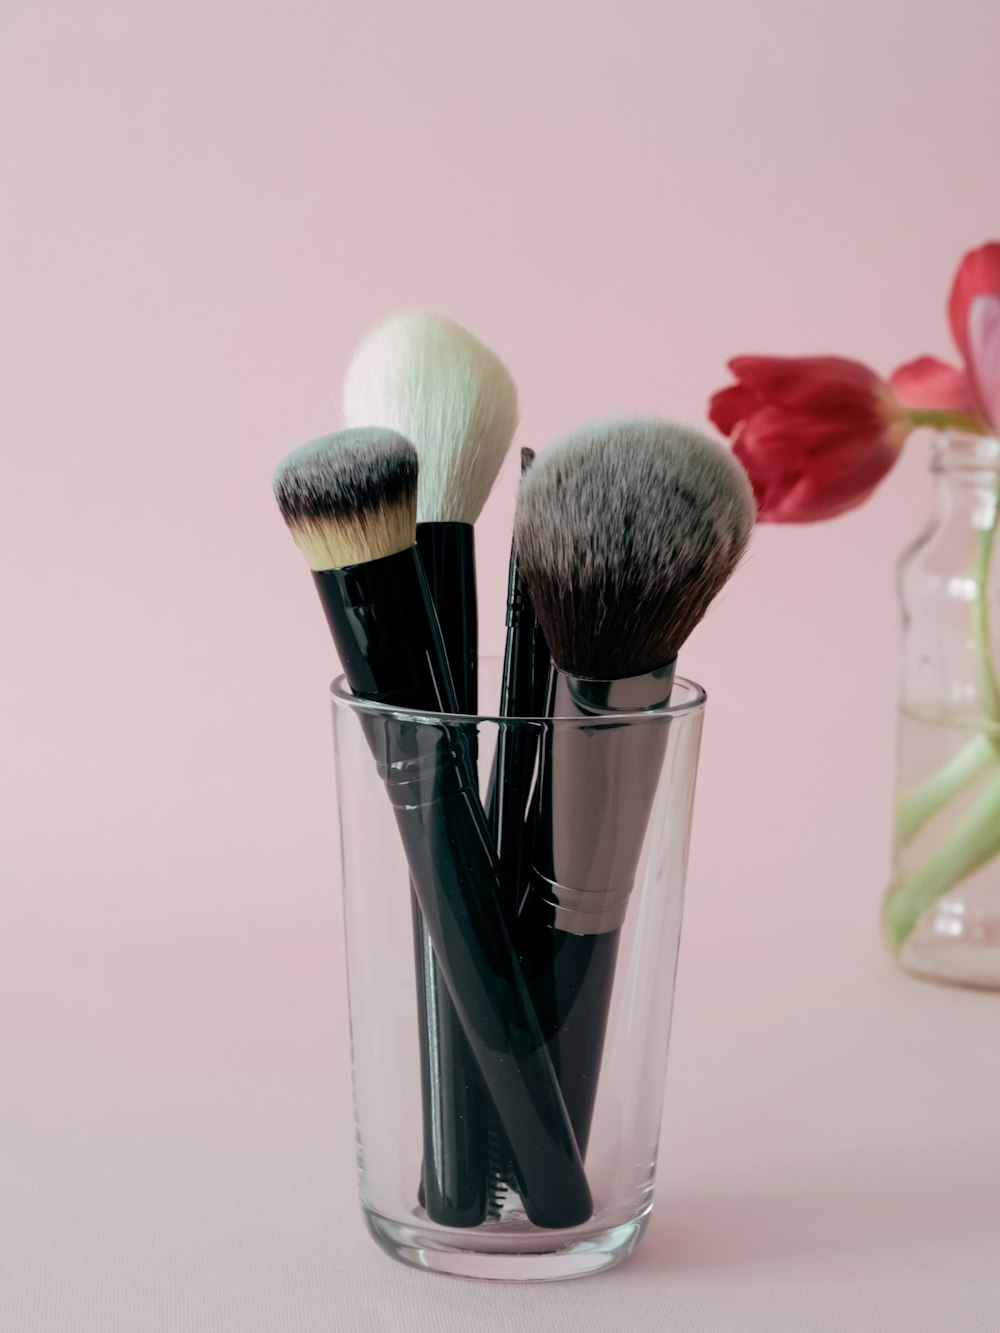 a glass filled with makeup brushes next to a vase with tulips